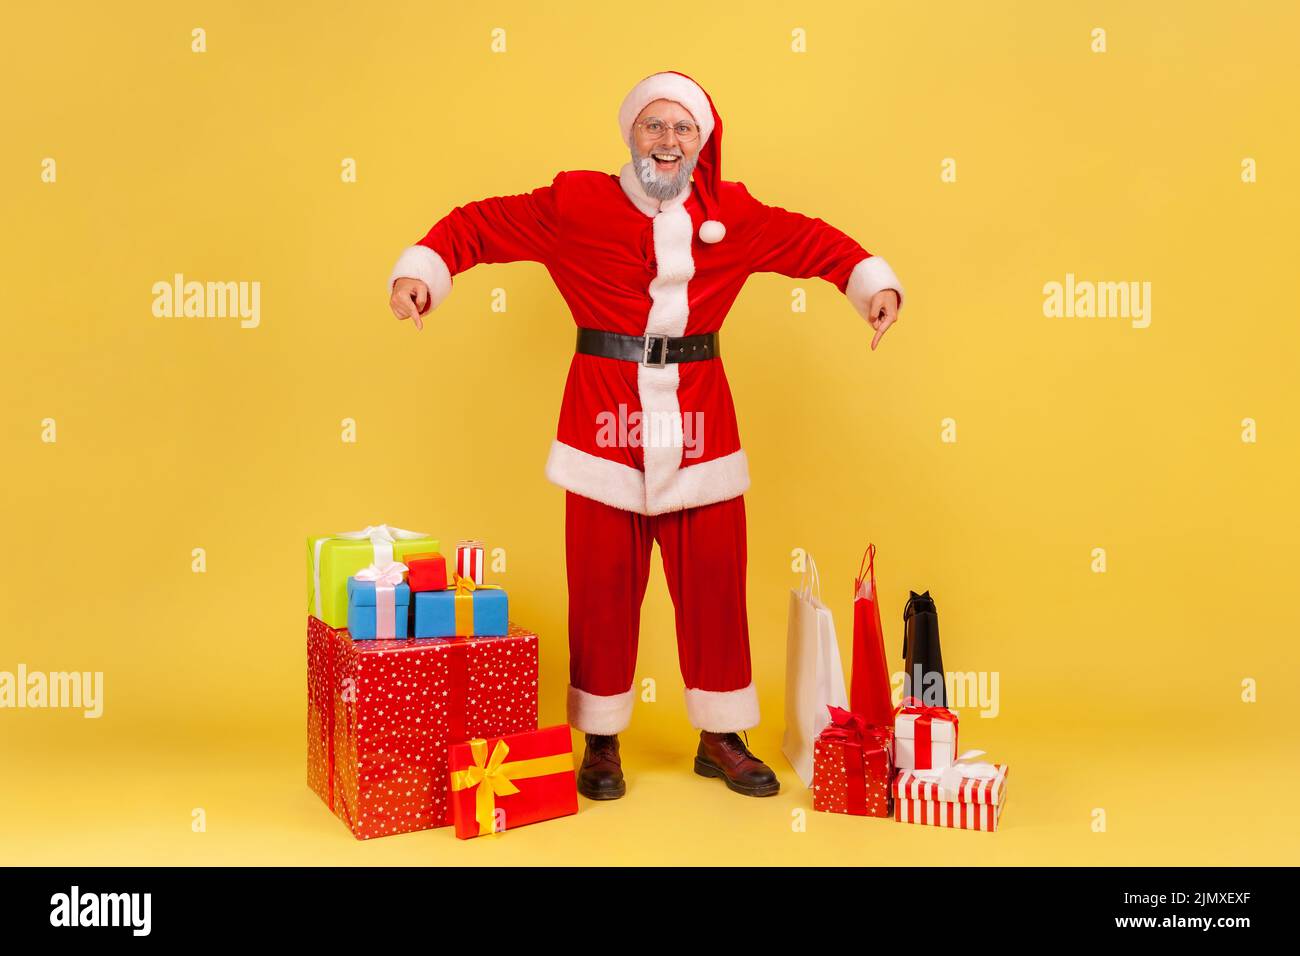 Full length portrait of smiling elderly man with gray beard wearing santa claus costume pointing at many present boxes for Christmas holidays. Indoor studio shot isolated on yellow background. Stock Photo